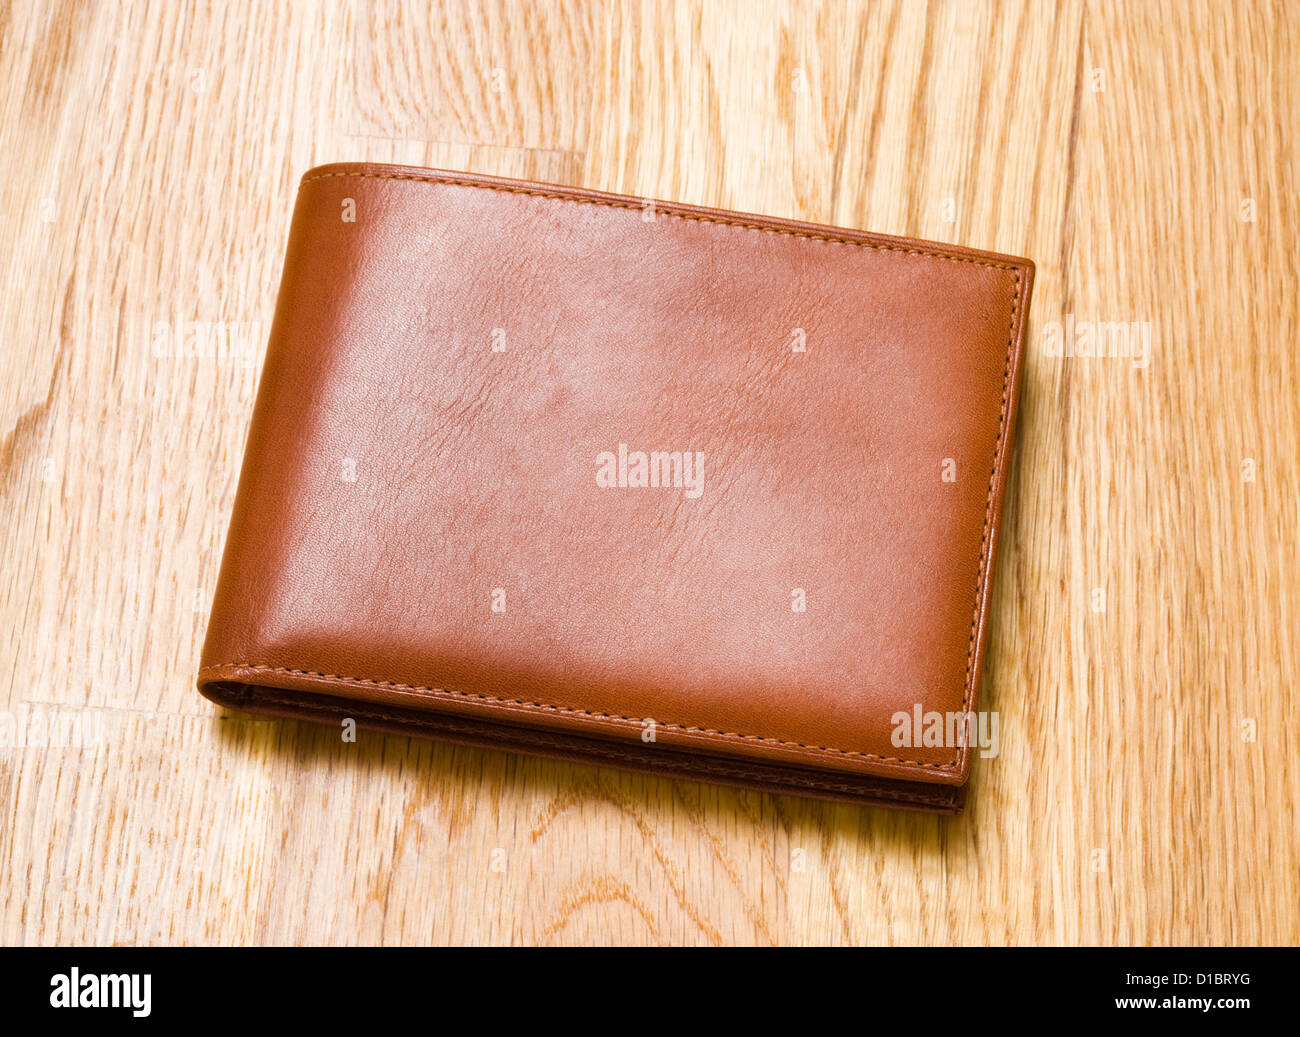 Leather wallet. Stock Photo